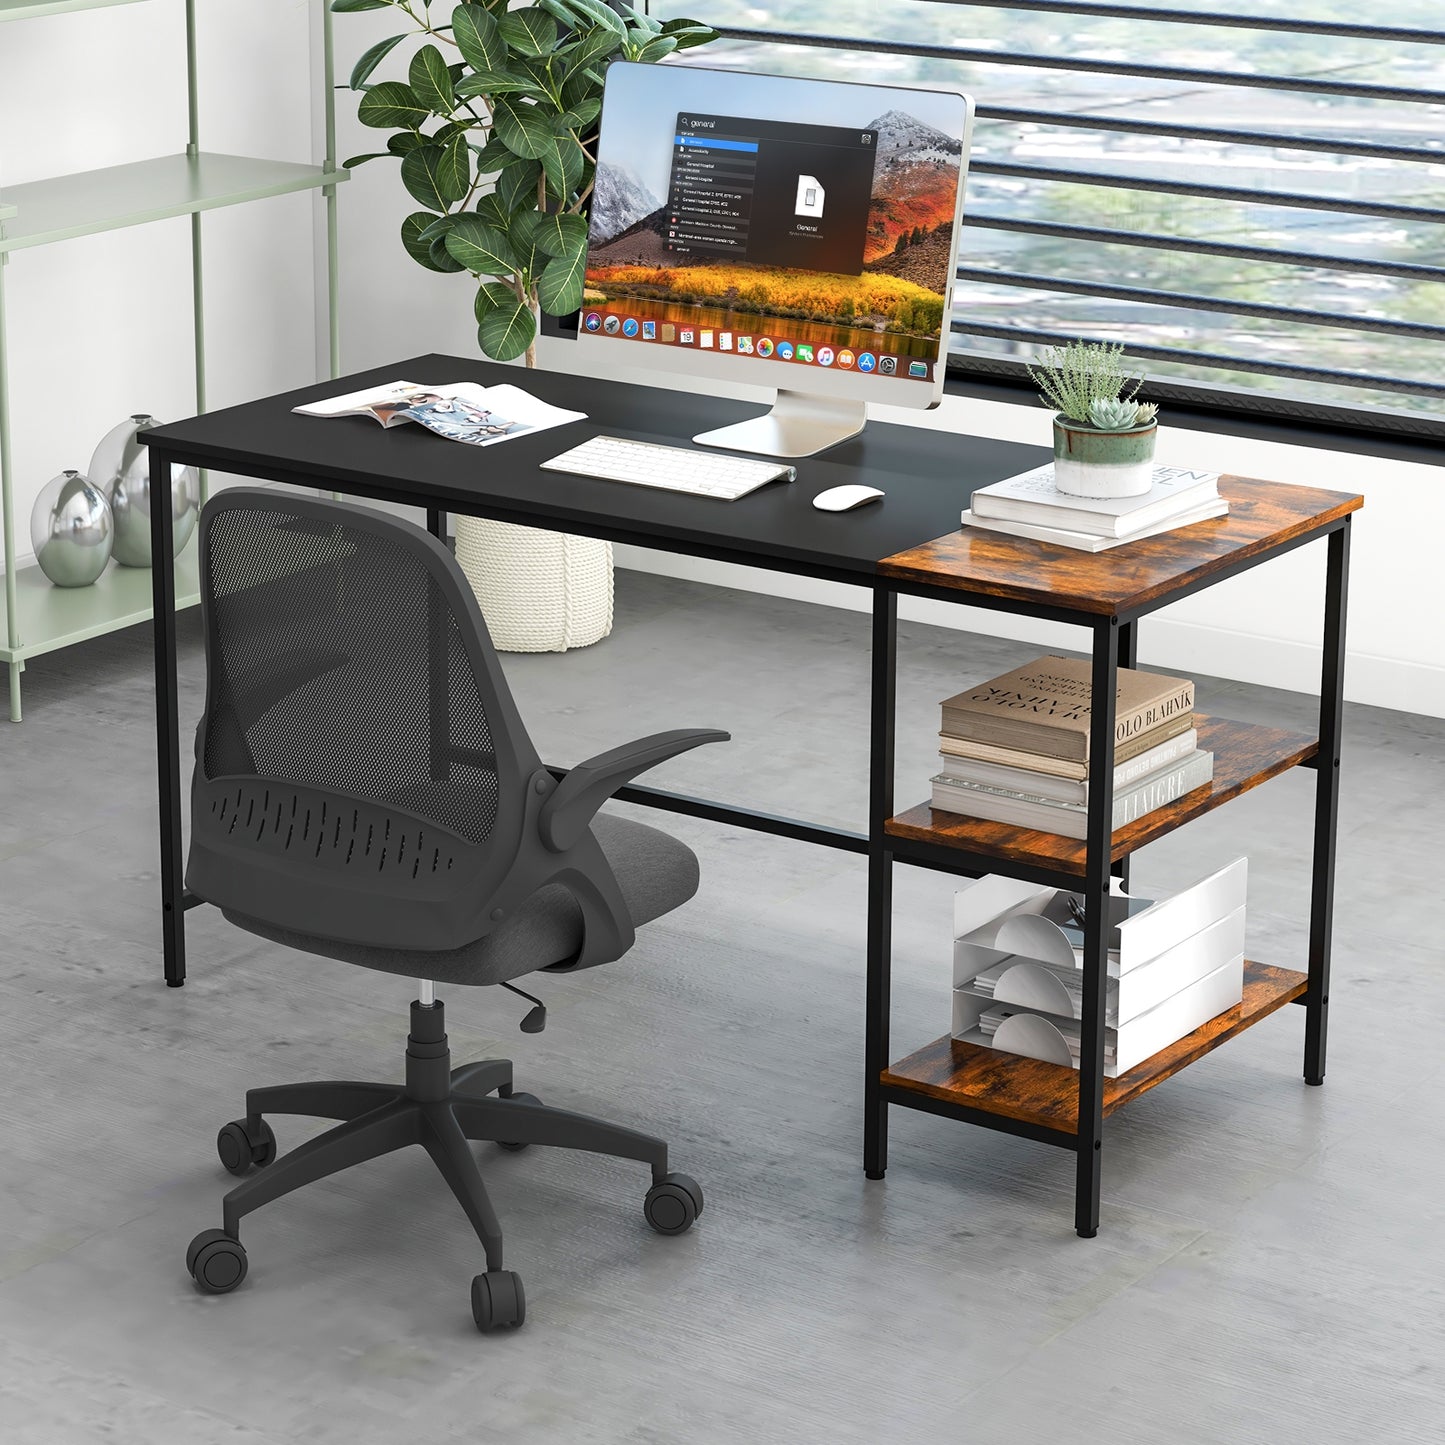 55" Modern Industrial Style Study Writing Desk with 2 Storage Shelves-Black